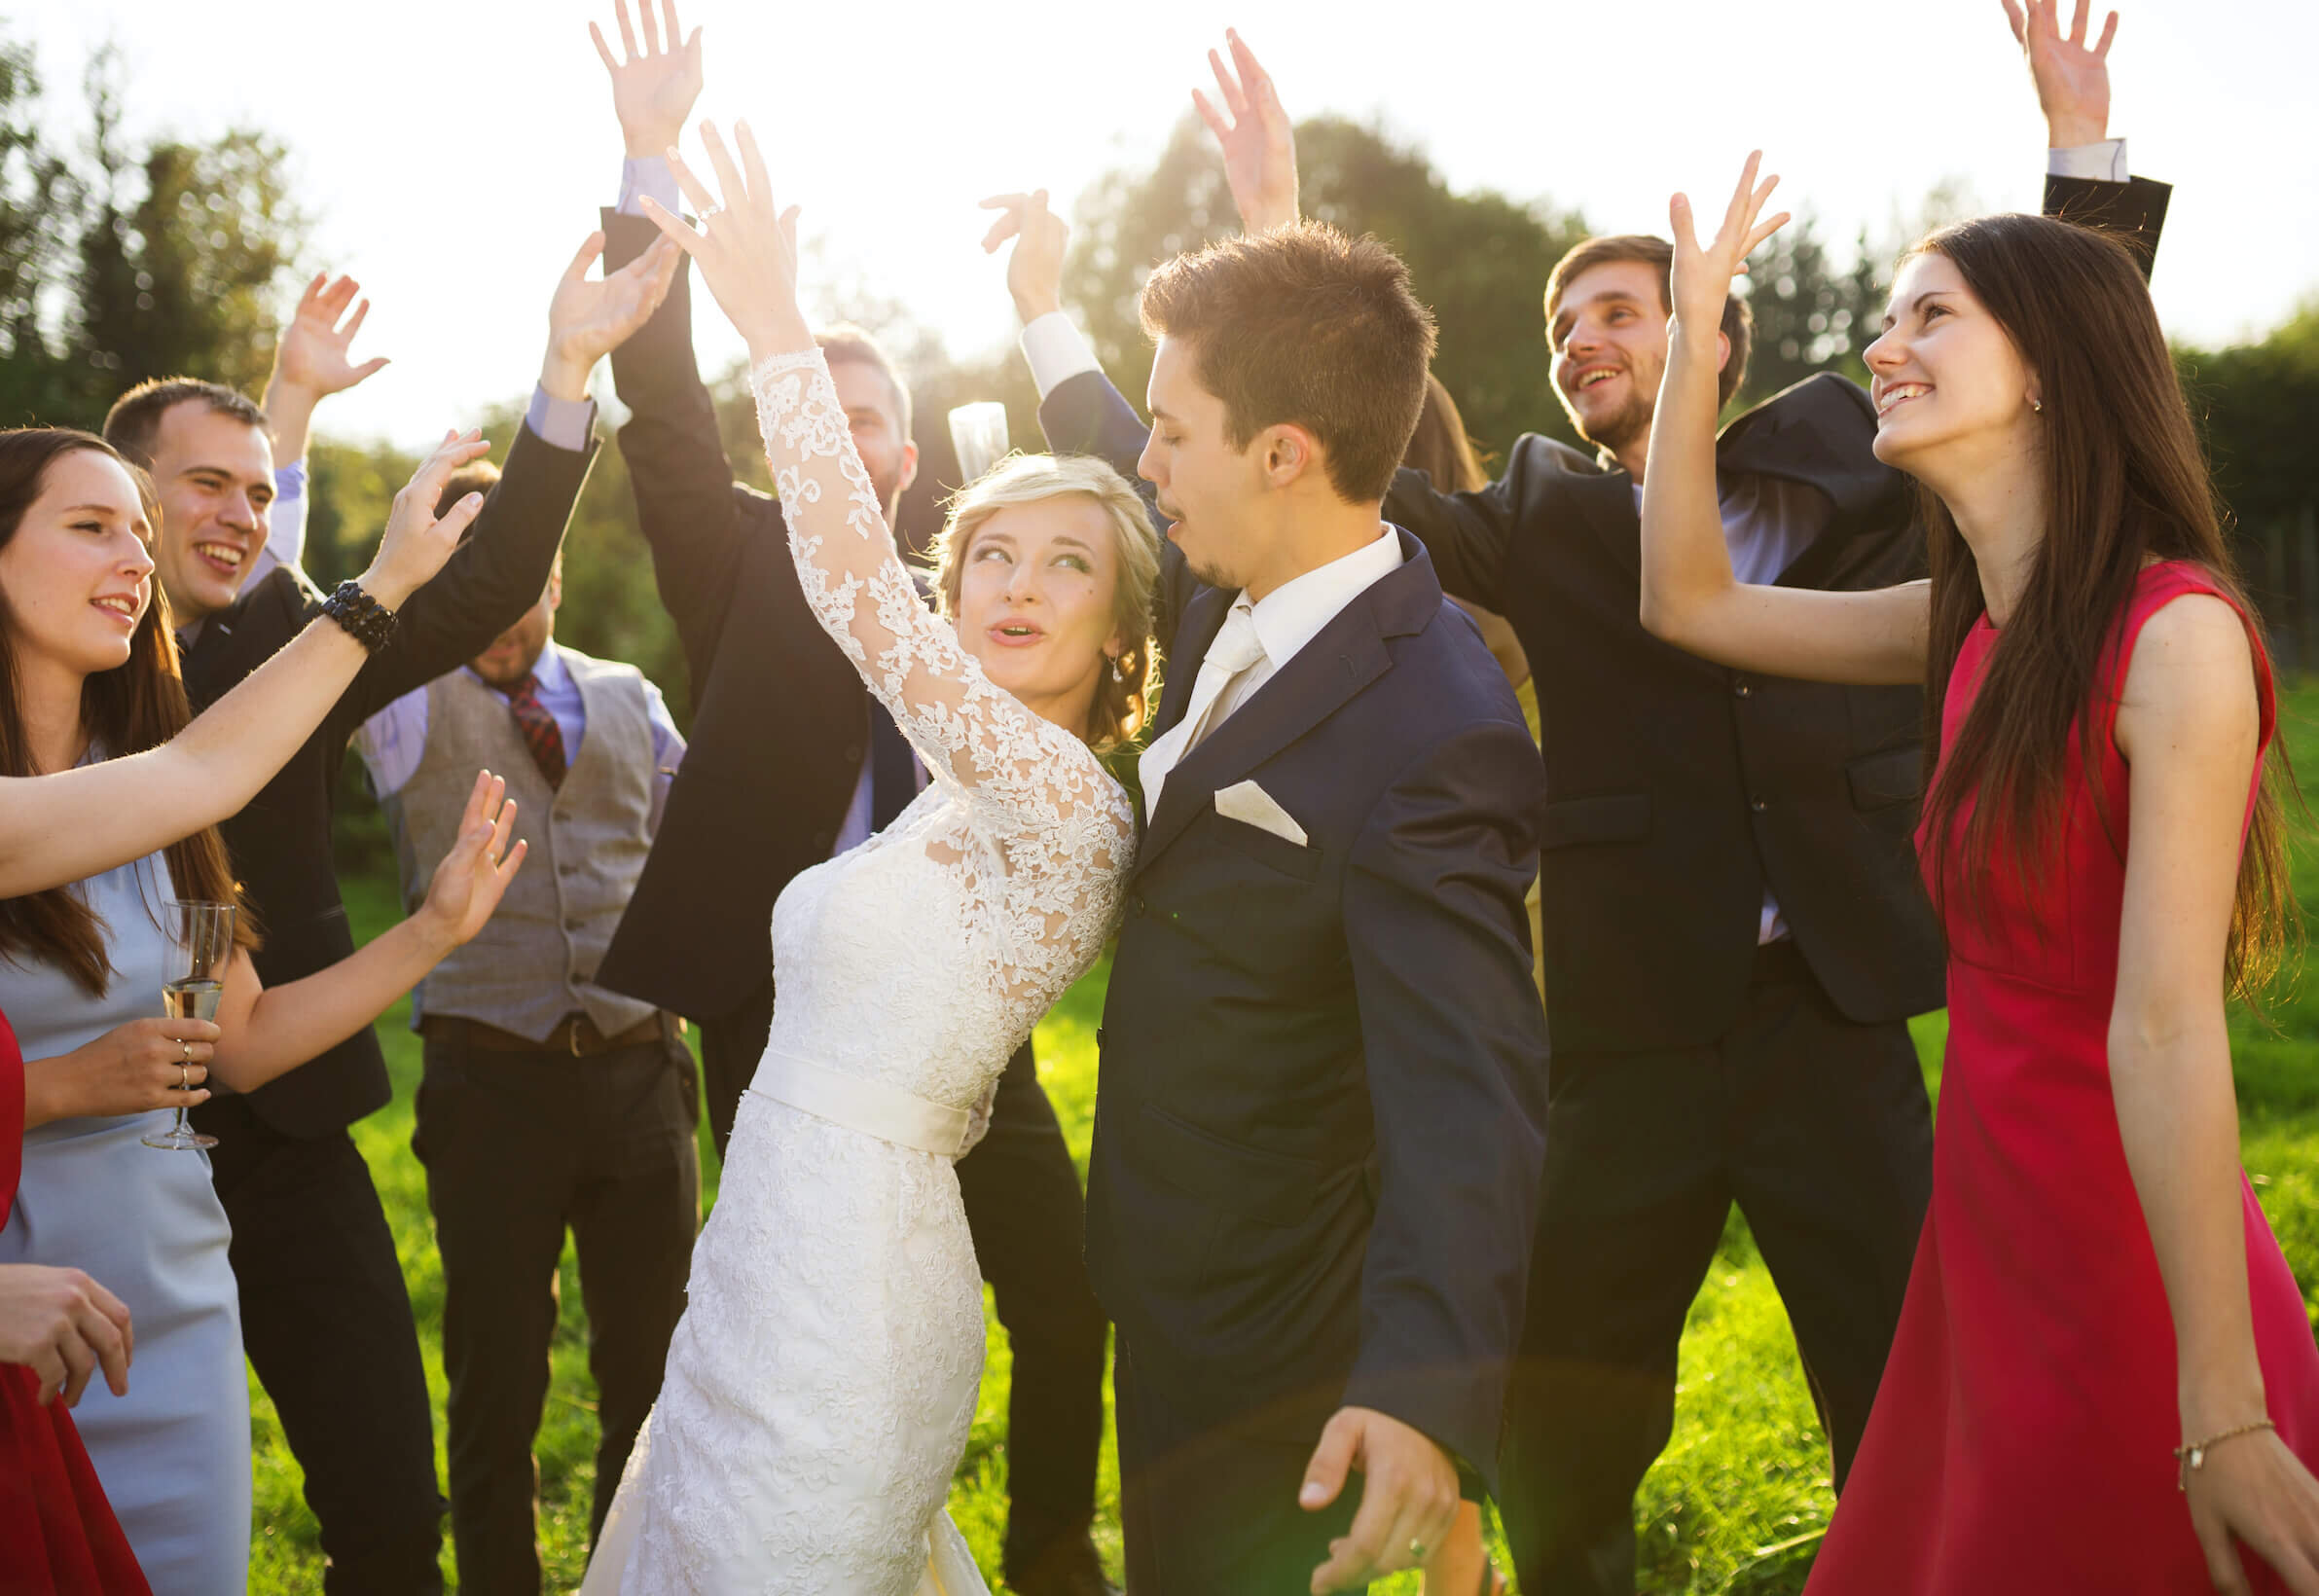 Love Songs For Her - 40 Ideas For Wedding Playlist In 2022